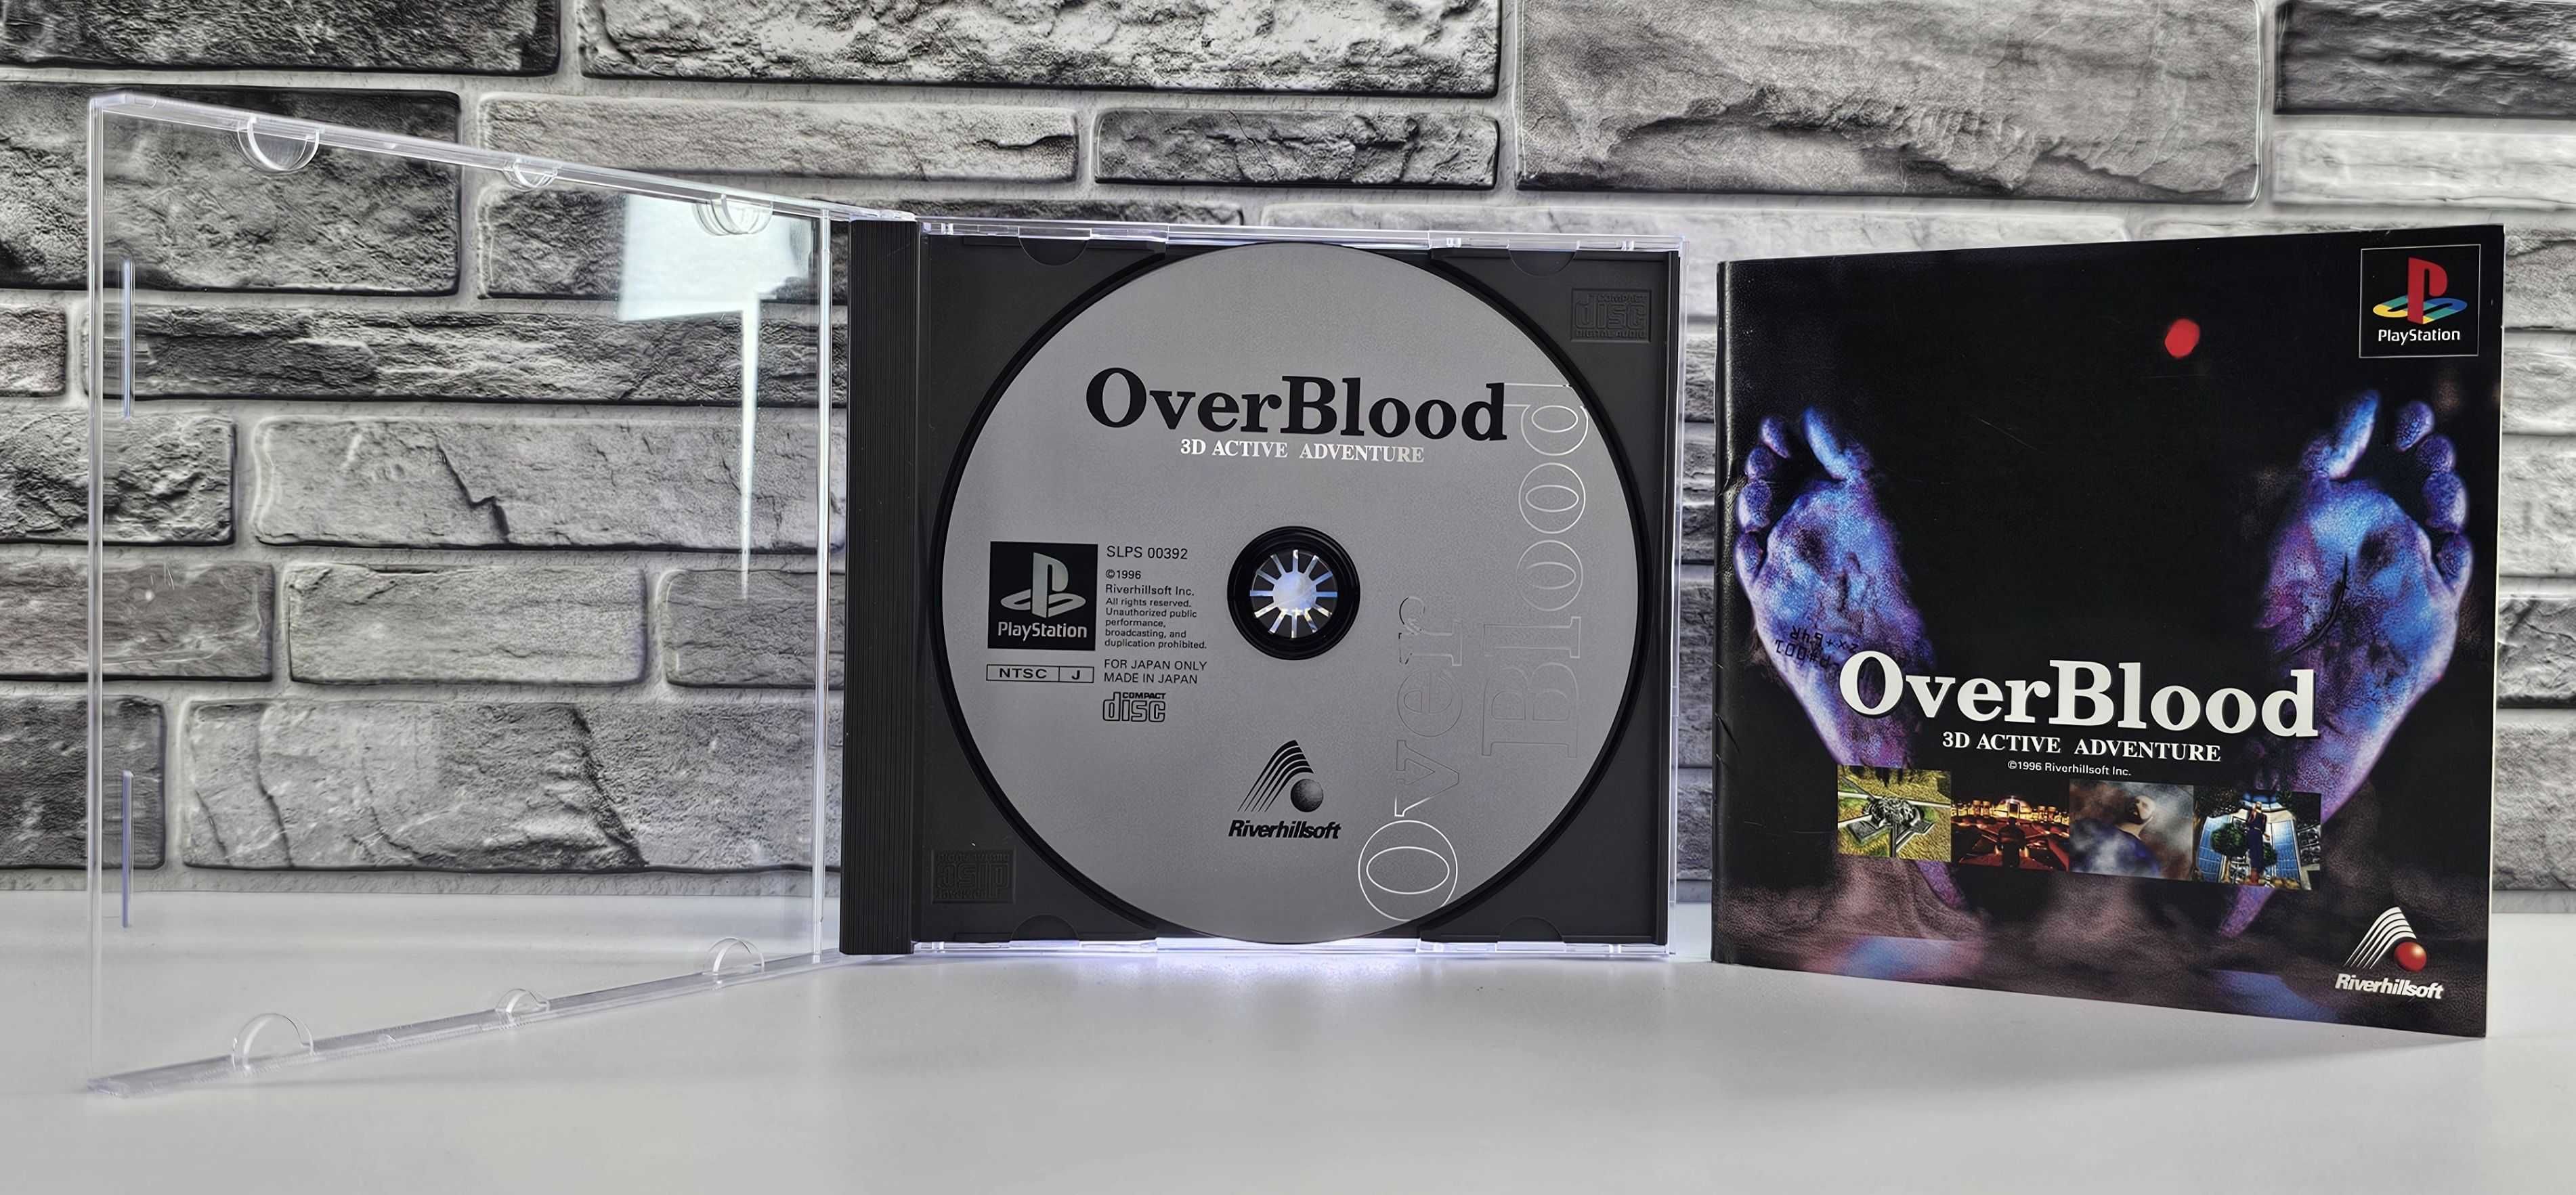 Playstation Overblood - A 3D Active Adventure